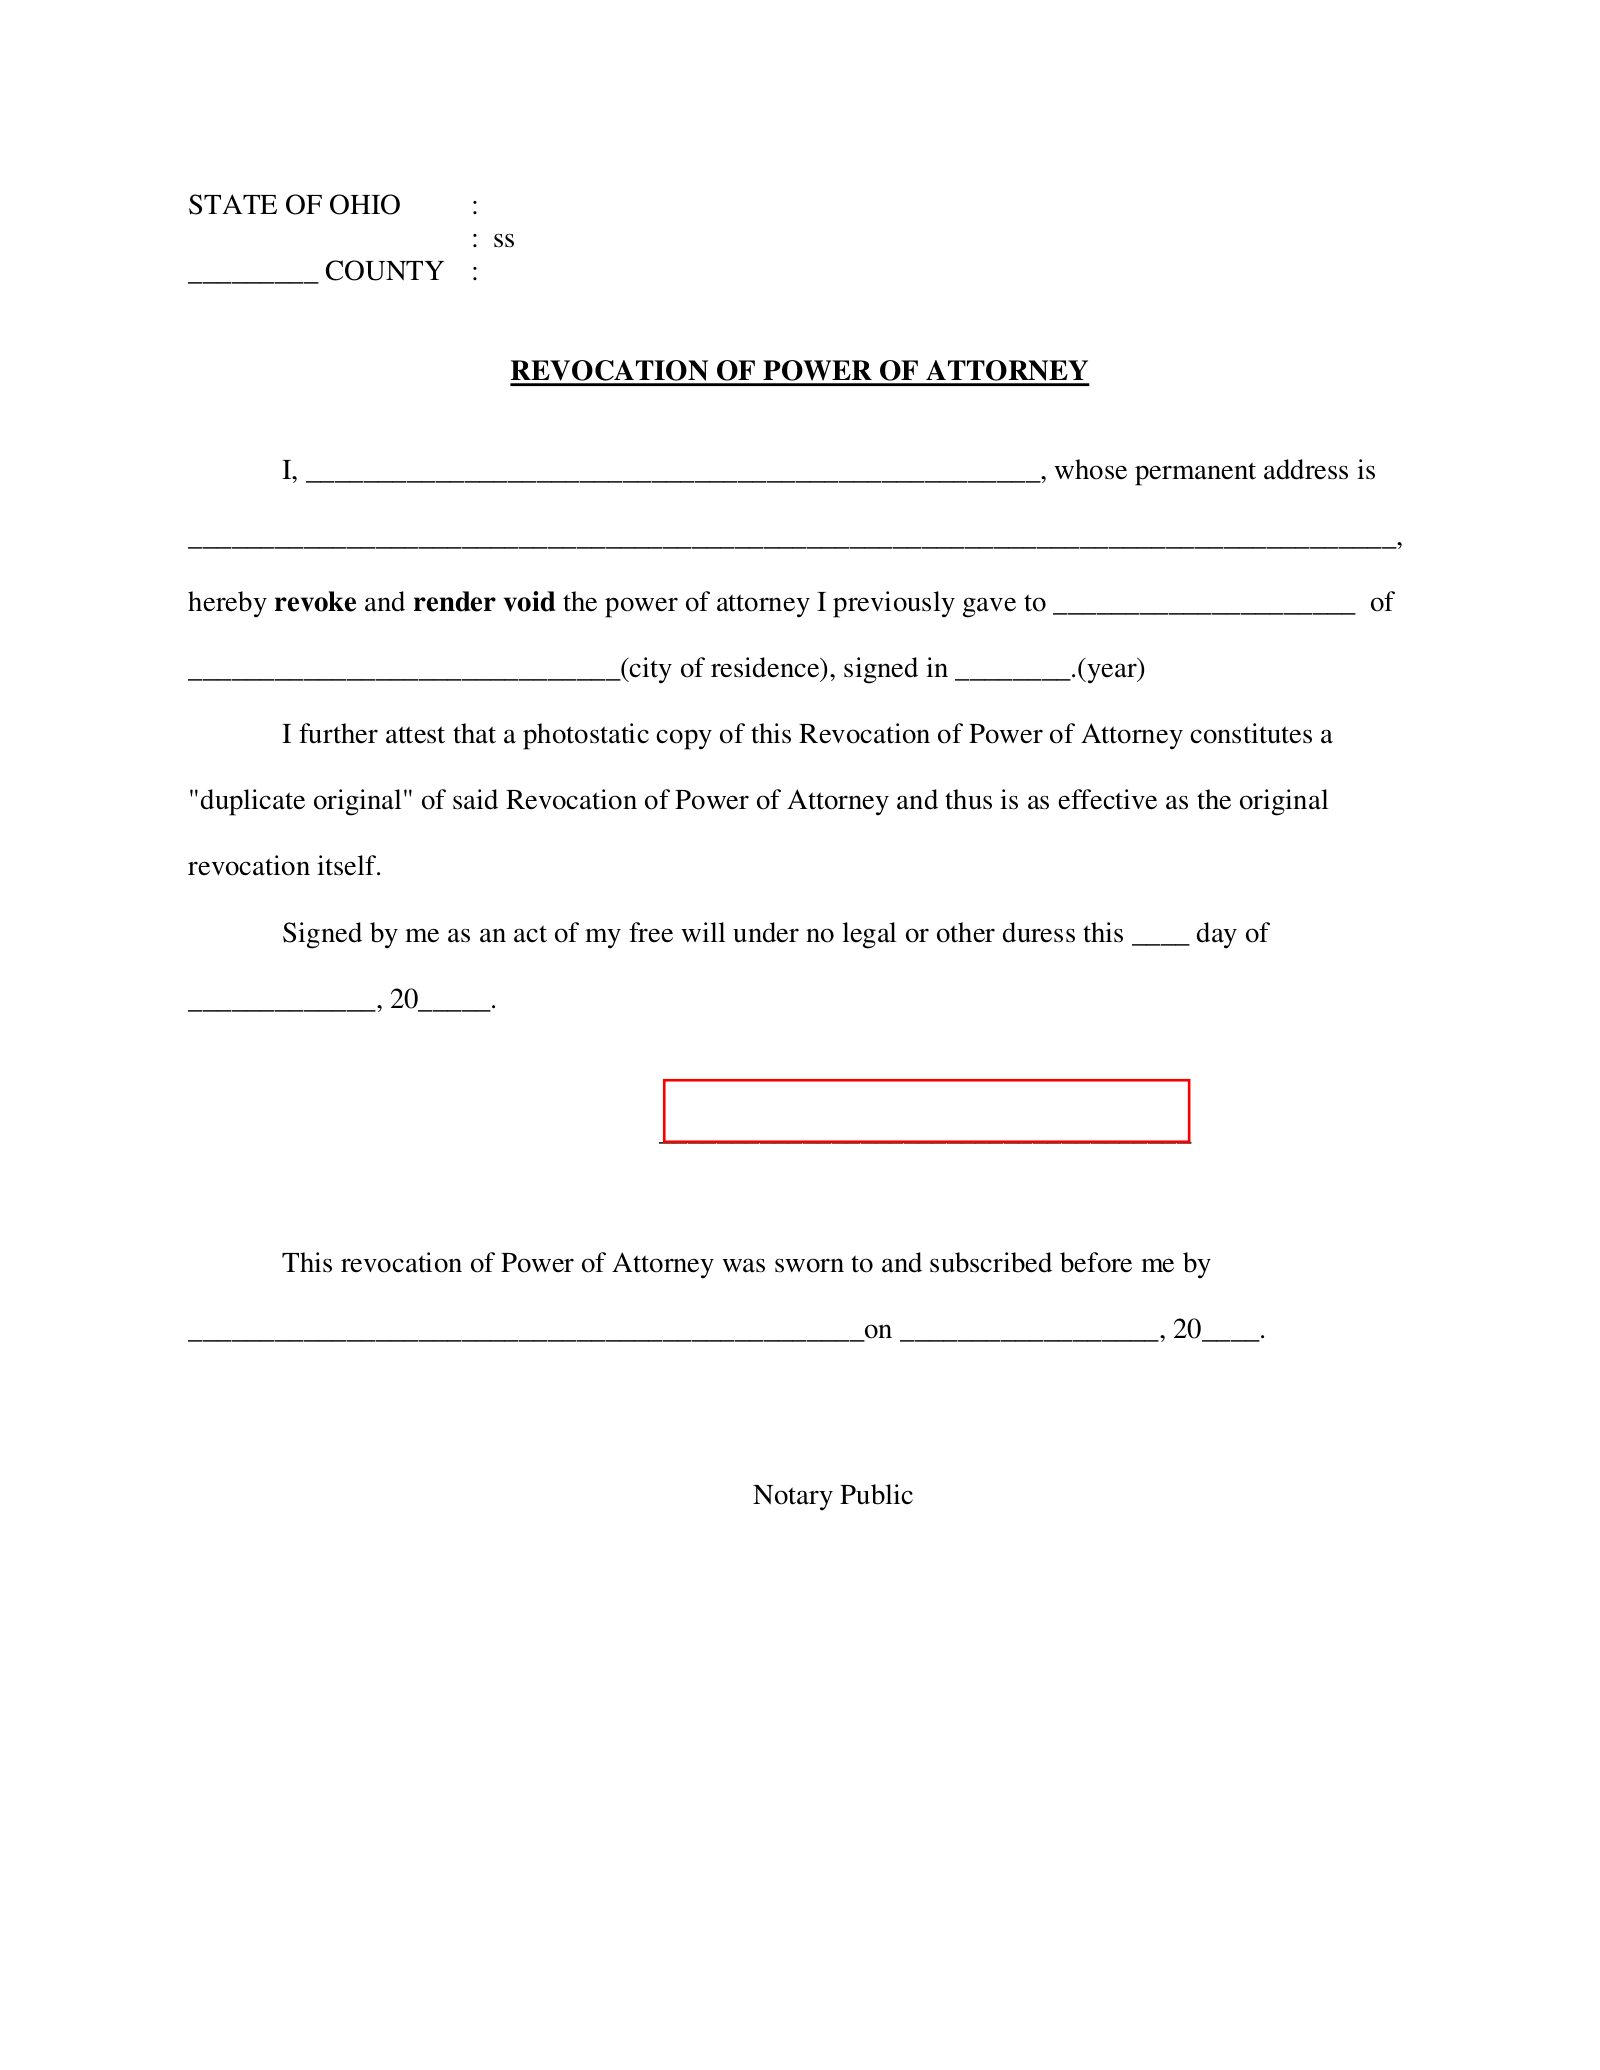 Free Ohio Revocation of Power of Attorney Form - Word | PDF | eForms - Free Fillable Forms